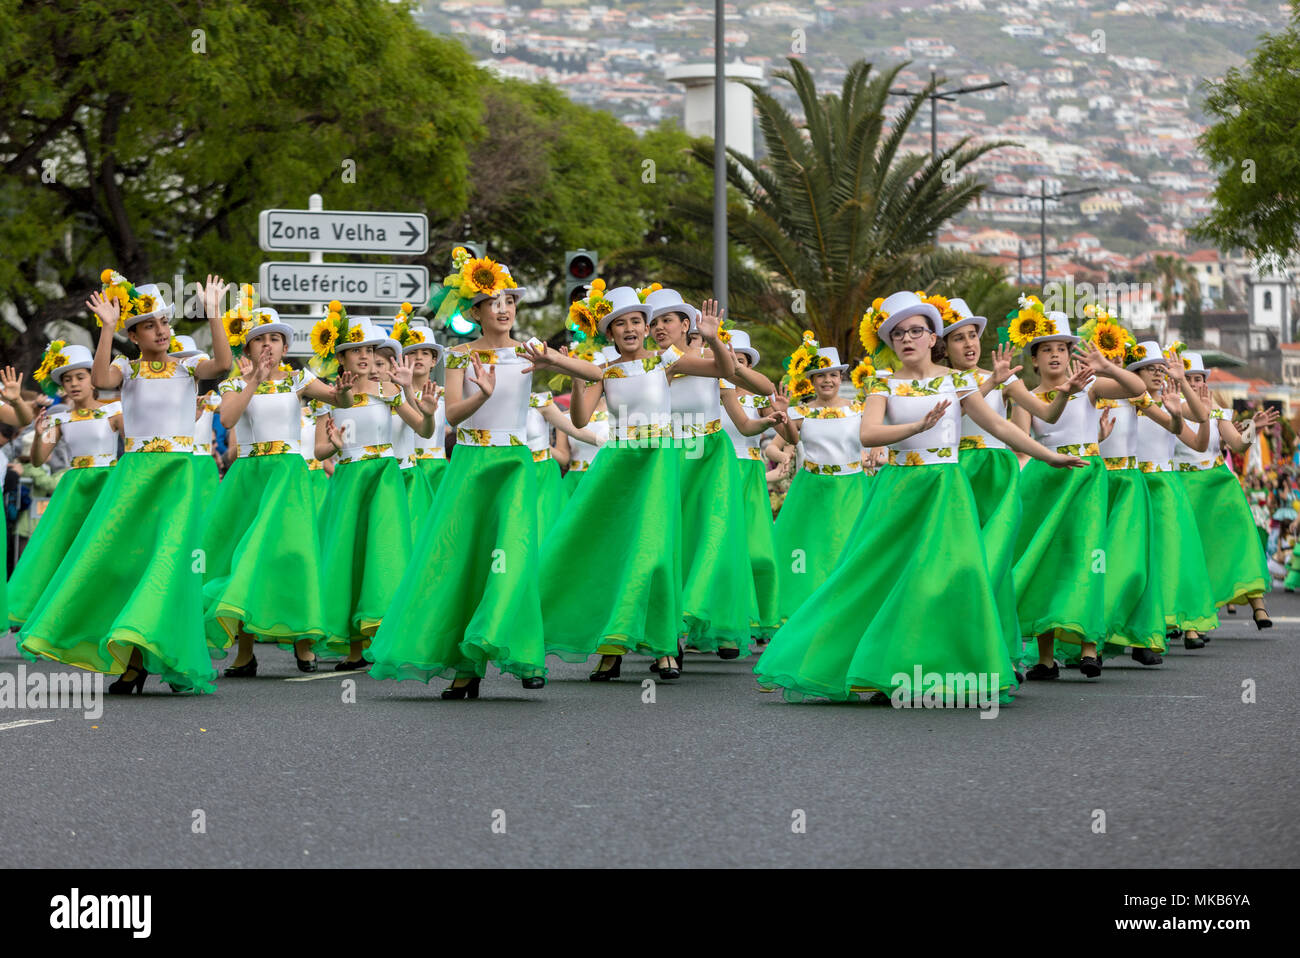 Funchal; Madeira; Portugal - April 22; 2018: A group of girls in colorful dresses with sunflowers motifs are dancing at Madeira Flower Festival Parade Stock Photo